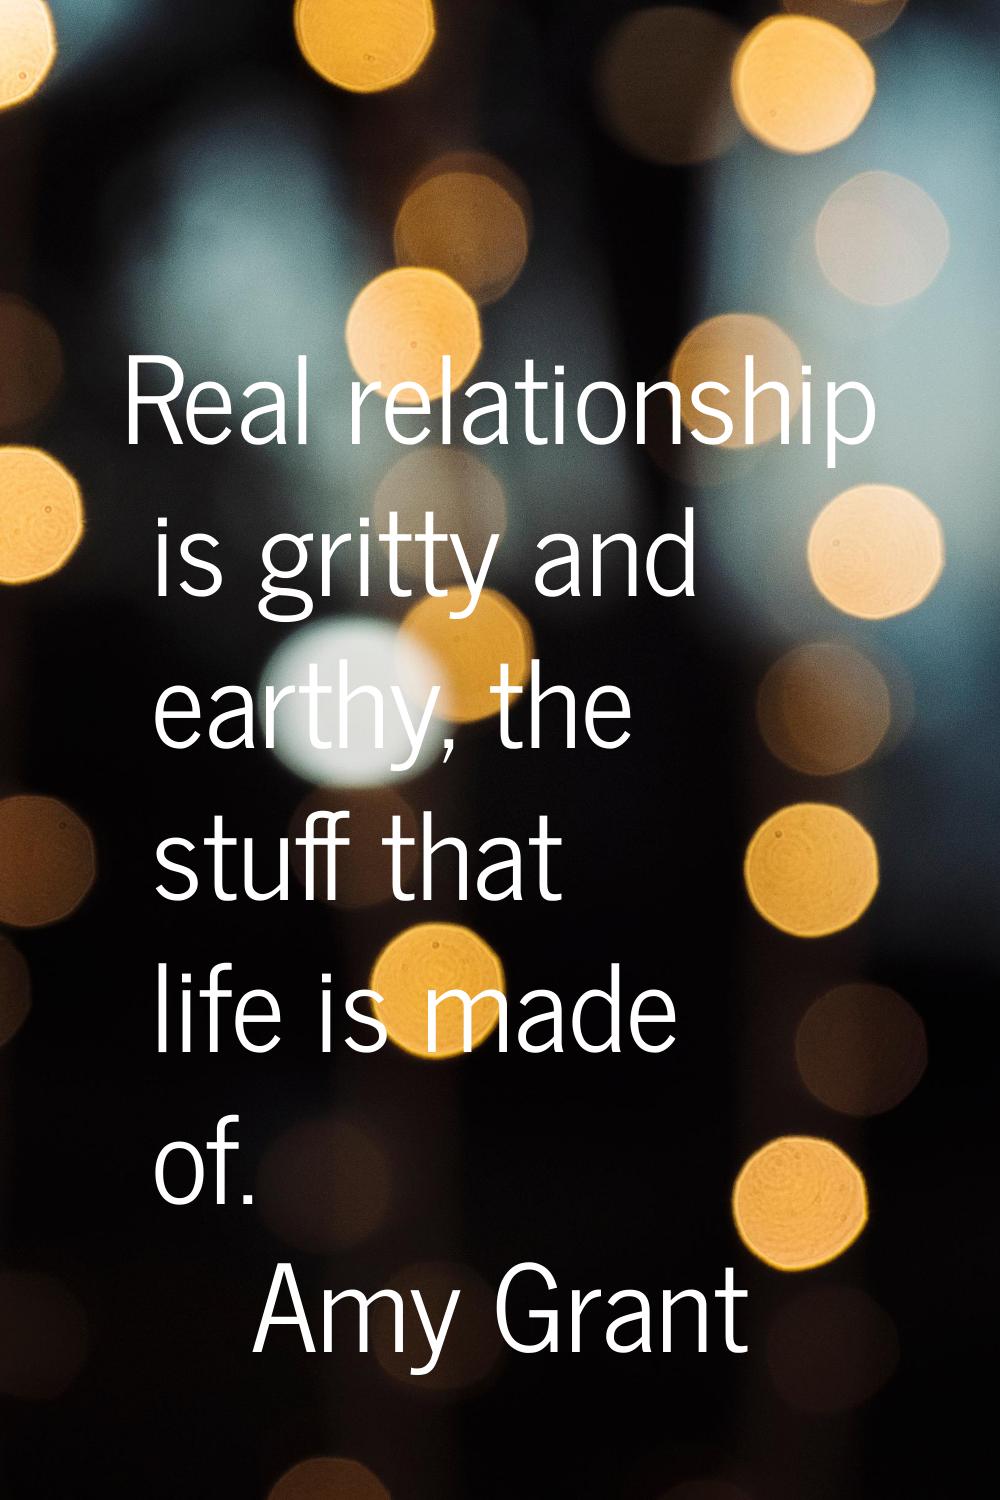 Real relationship is gritty and earthy, the stuff that life is made of.